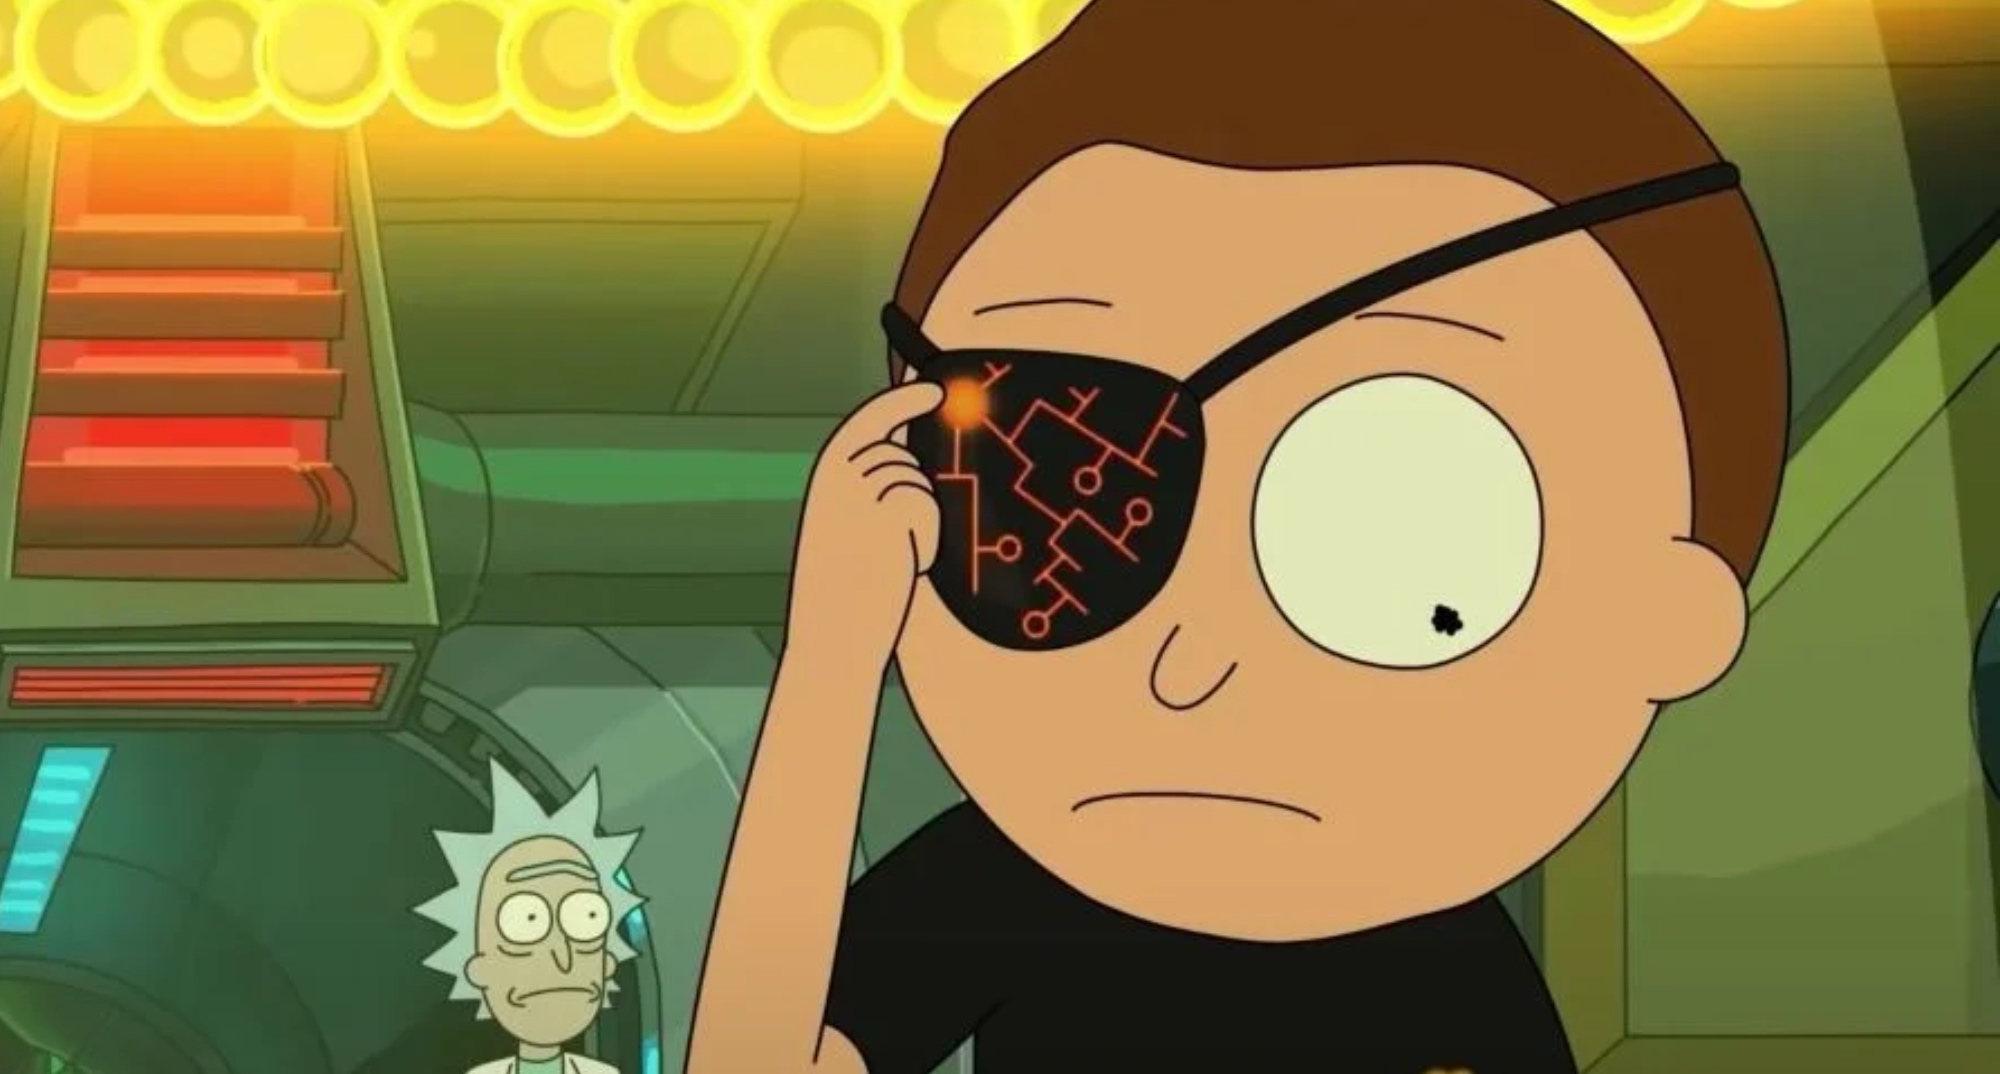 Evil Morty in 'Rick and Morty' Season 5 finale wearing eye patch.